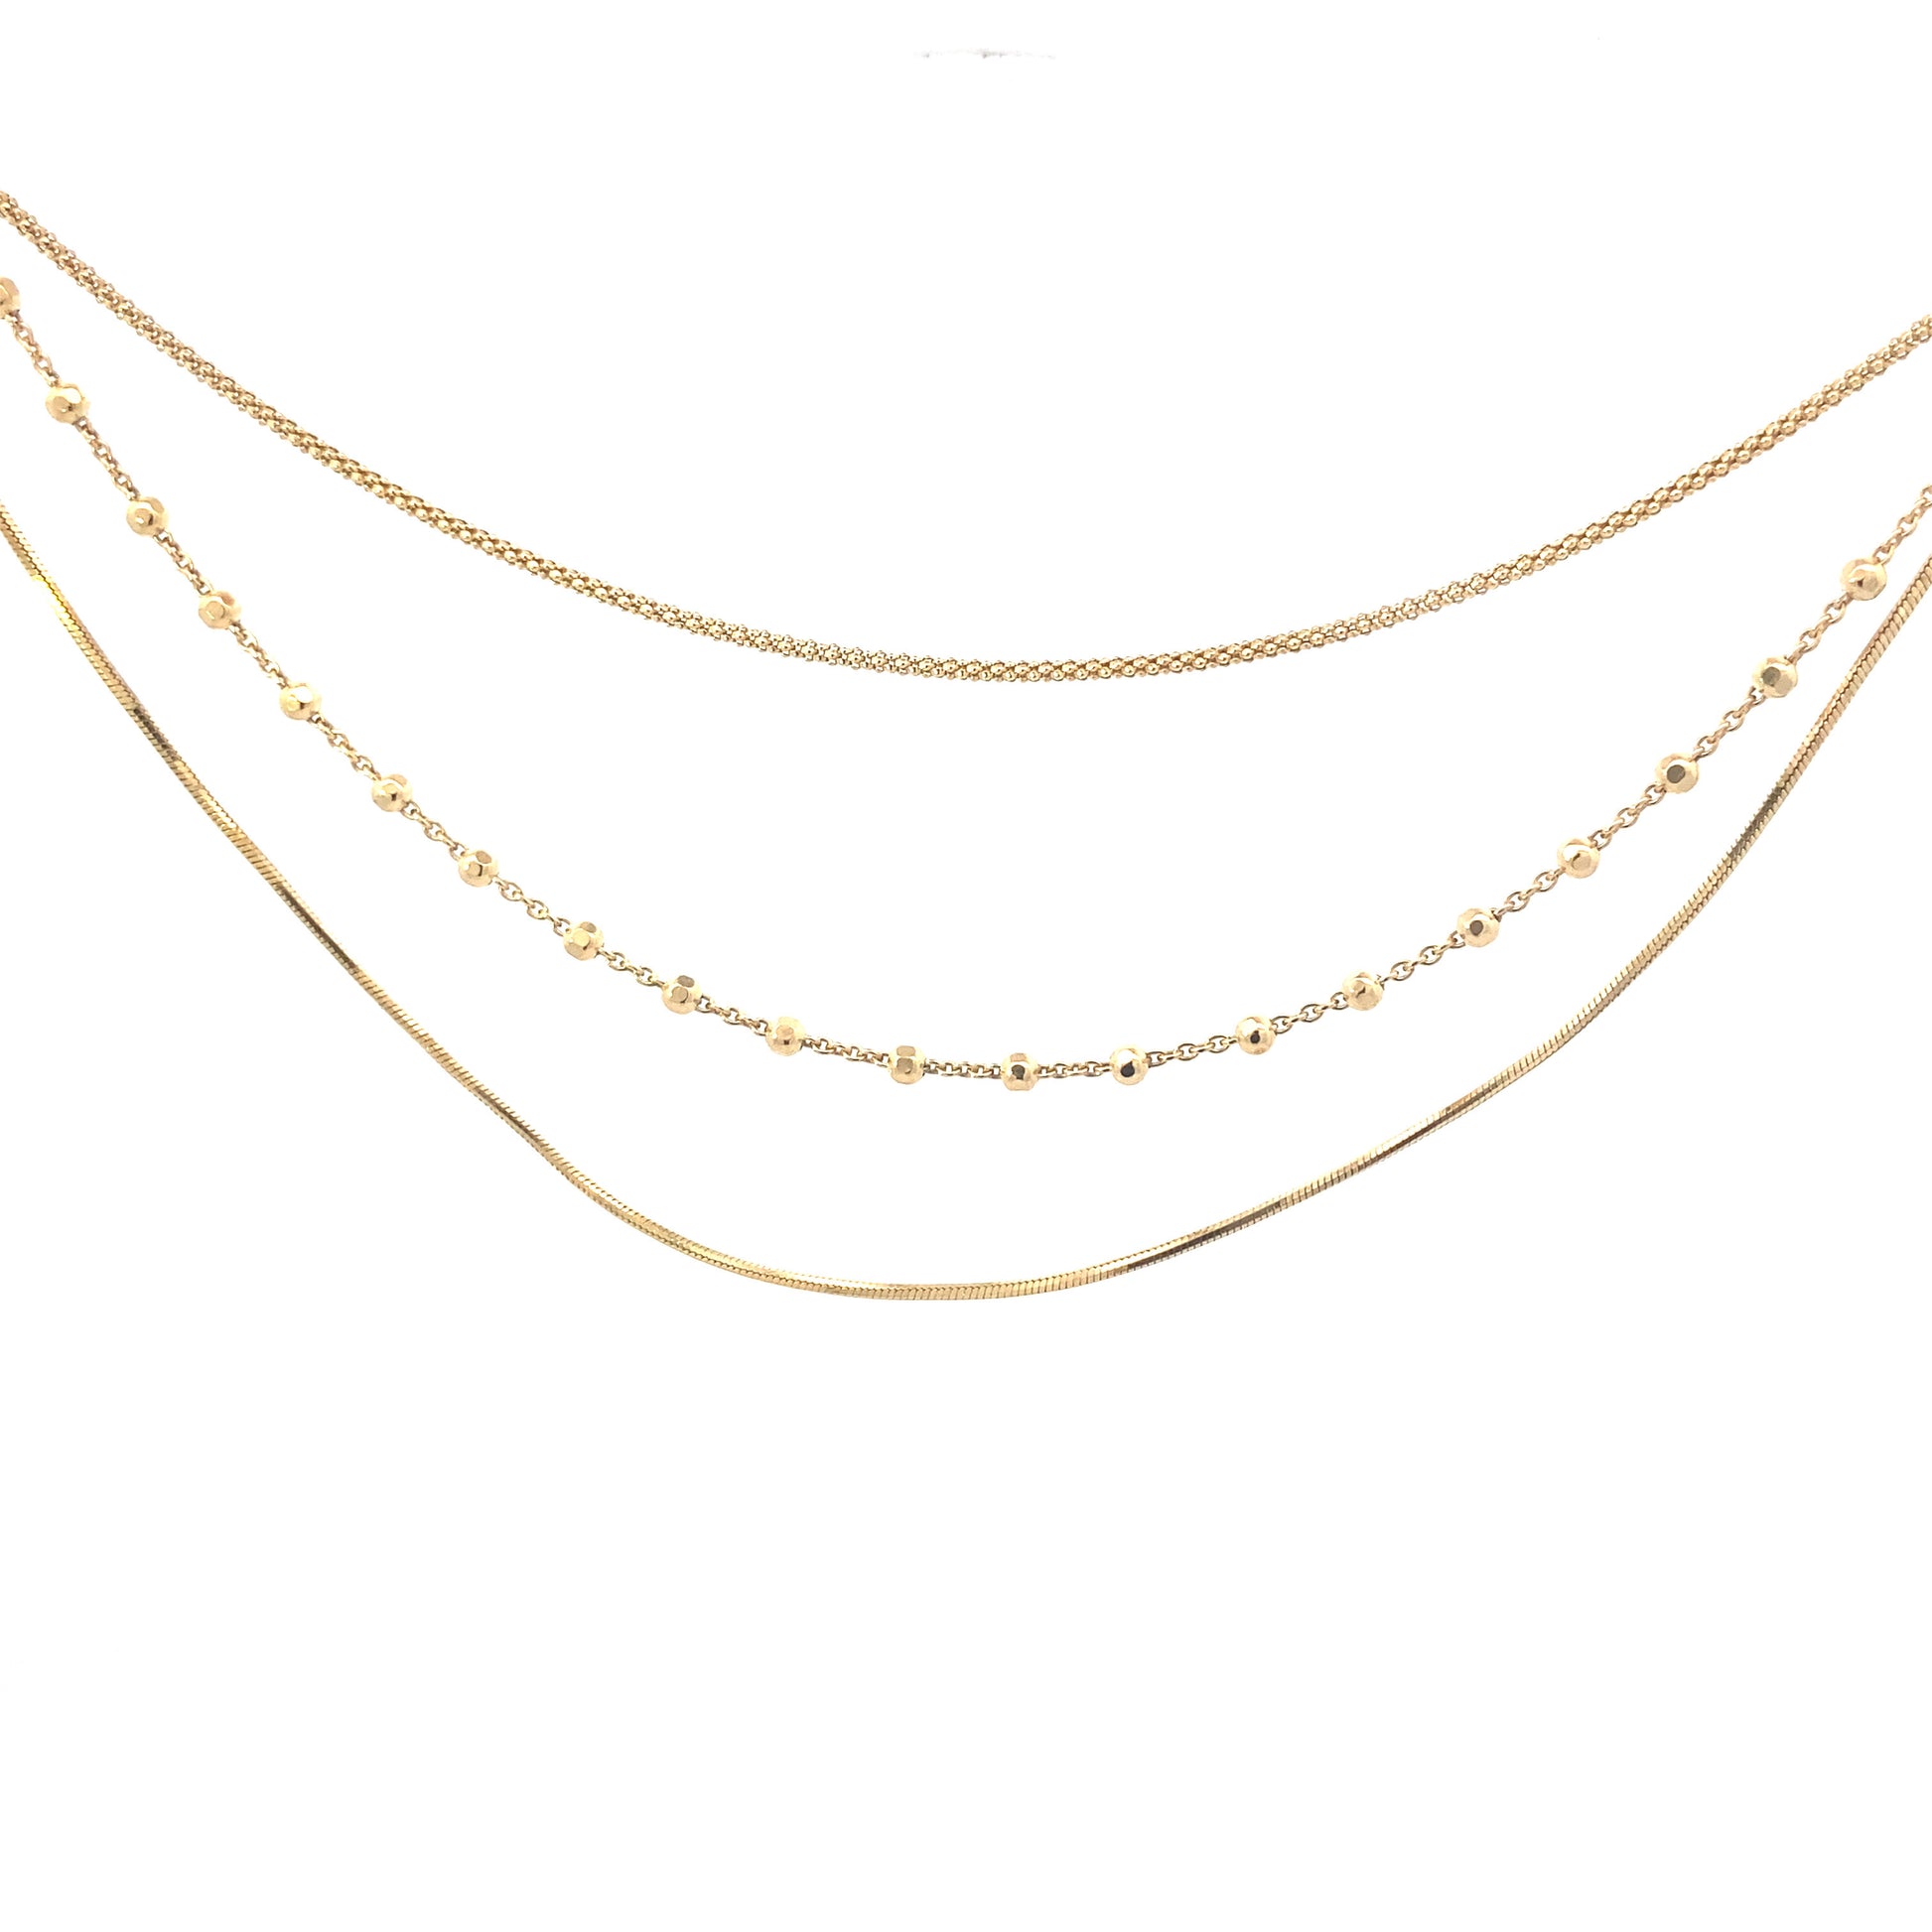 Marcello Pane Cleopatra Gold Necklace | Marcello Pane | Luby 